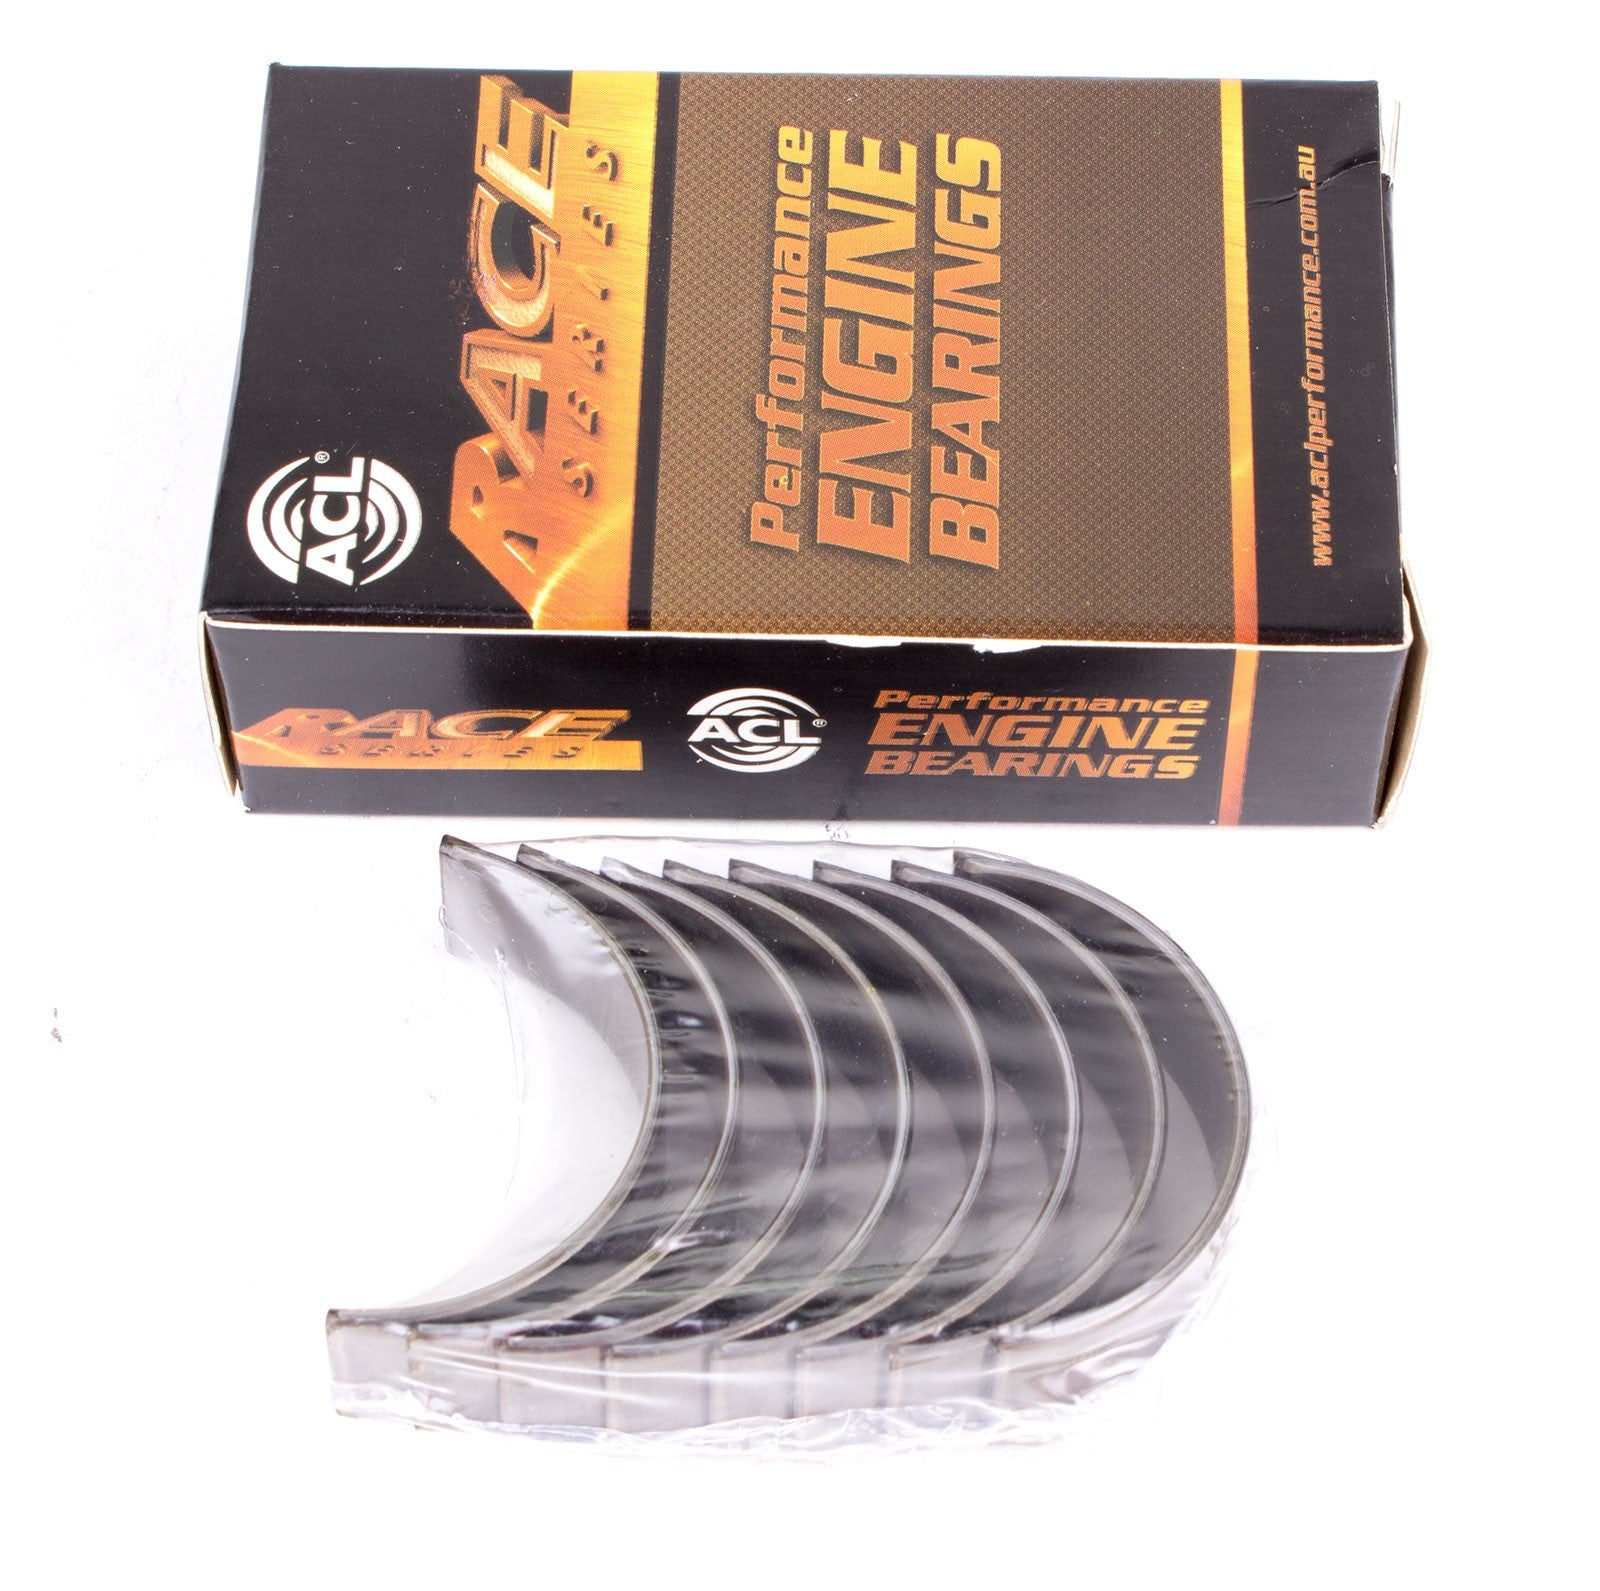 ACL 5M7807H-.25 Main bearing set (ACL Race Series) Photo-0 